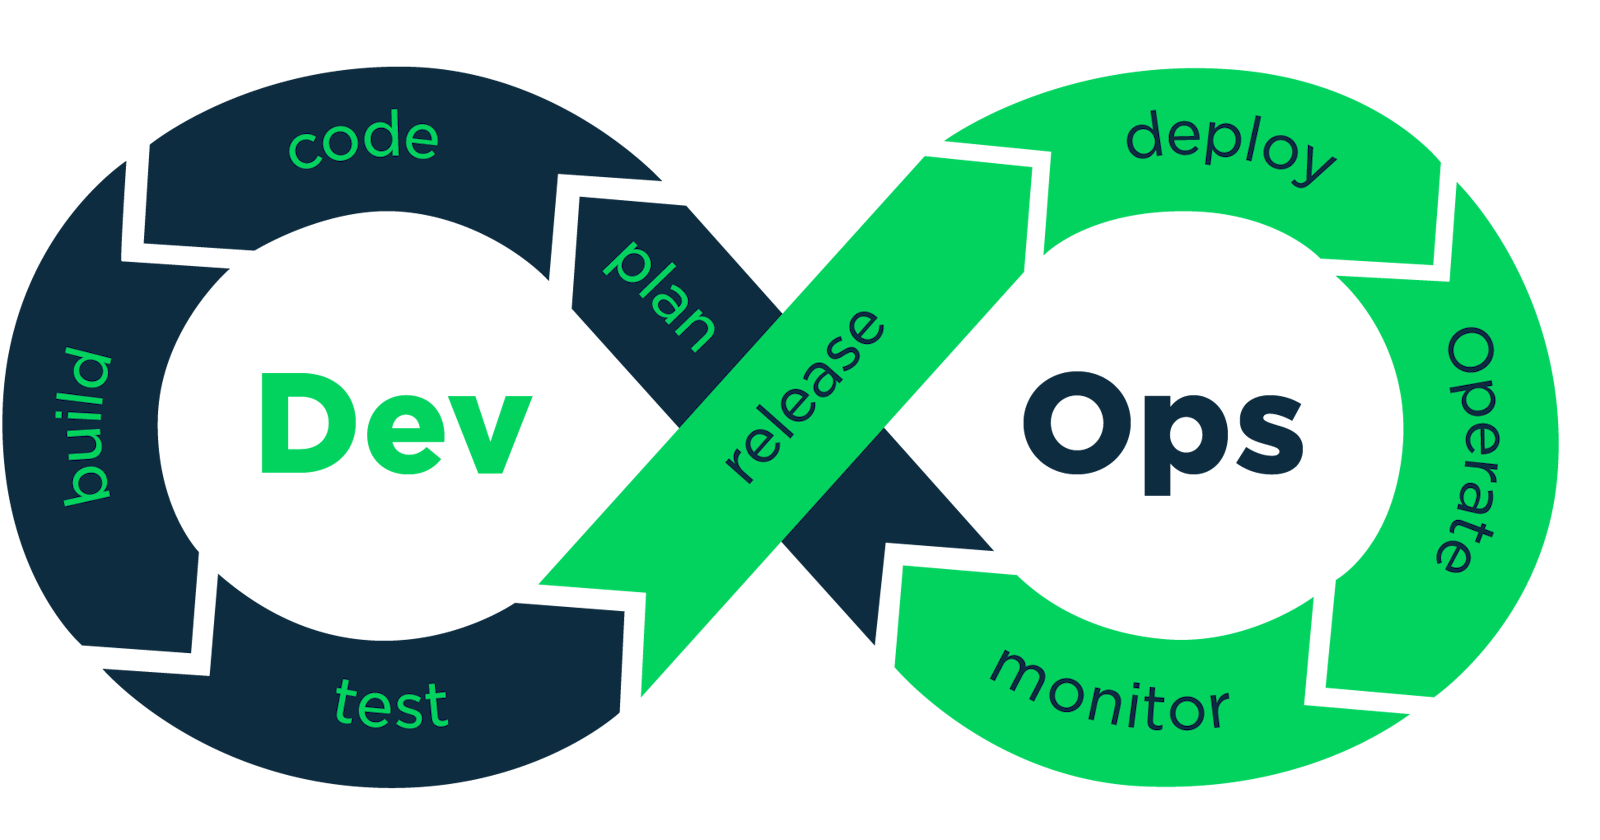 What is DevOps all about?